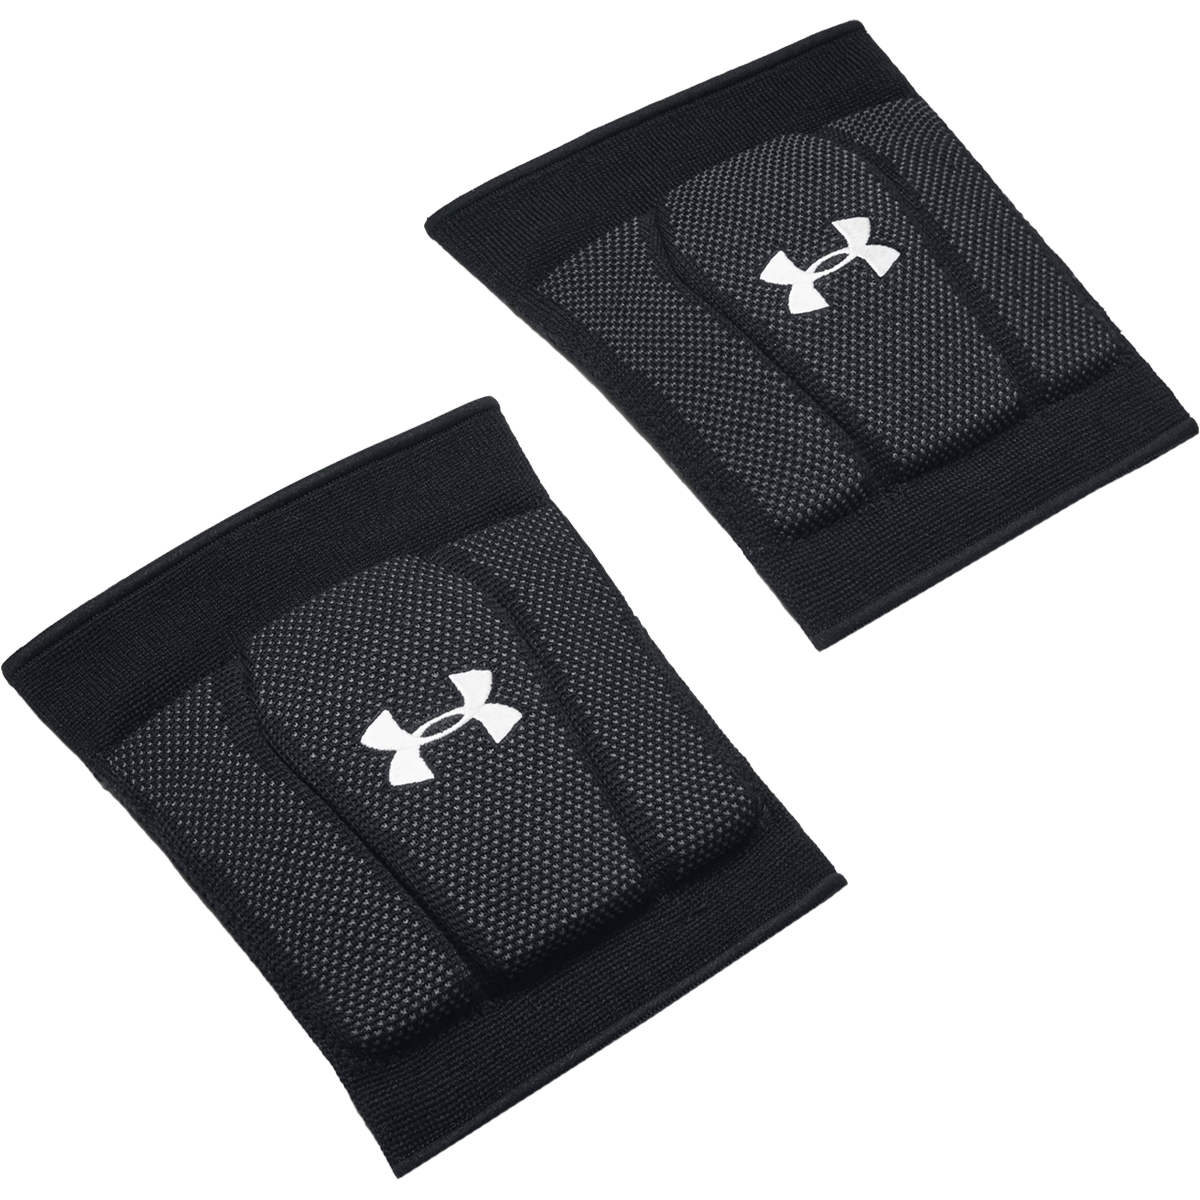 G-Form Envy Volleyball Knee Pads